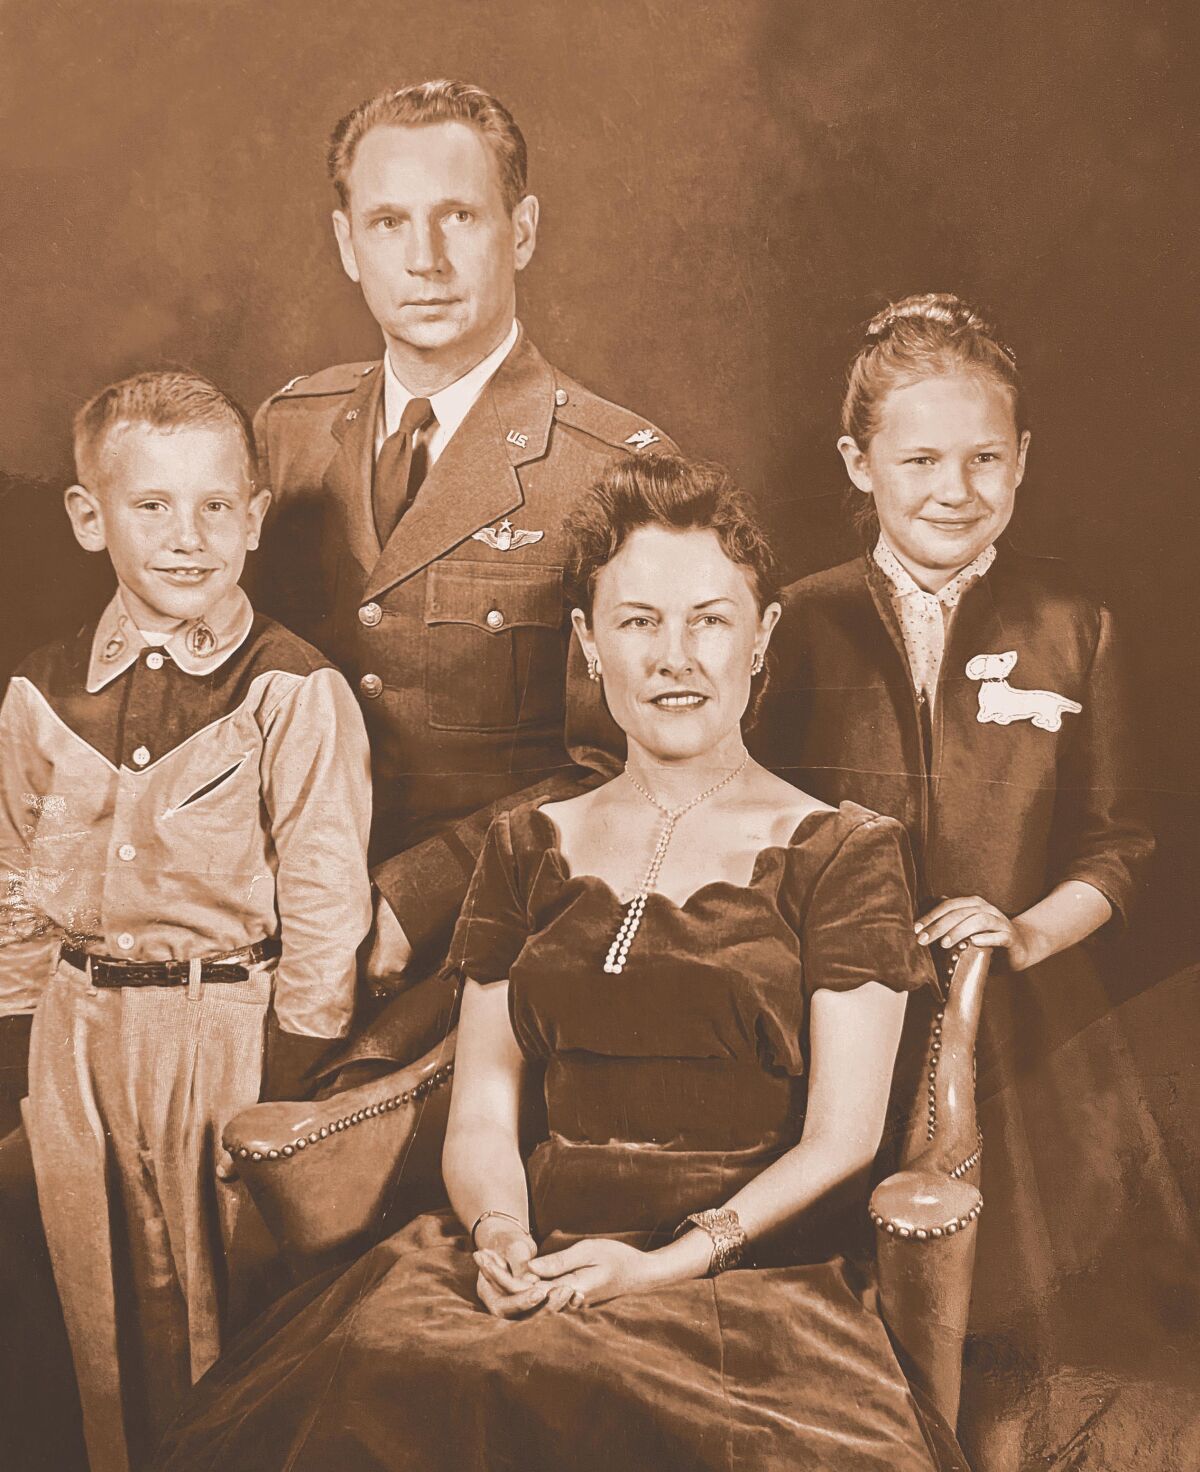 Ruth Christensen and her husband John with their children, Lea and John, in 1955